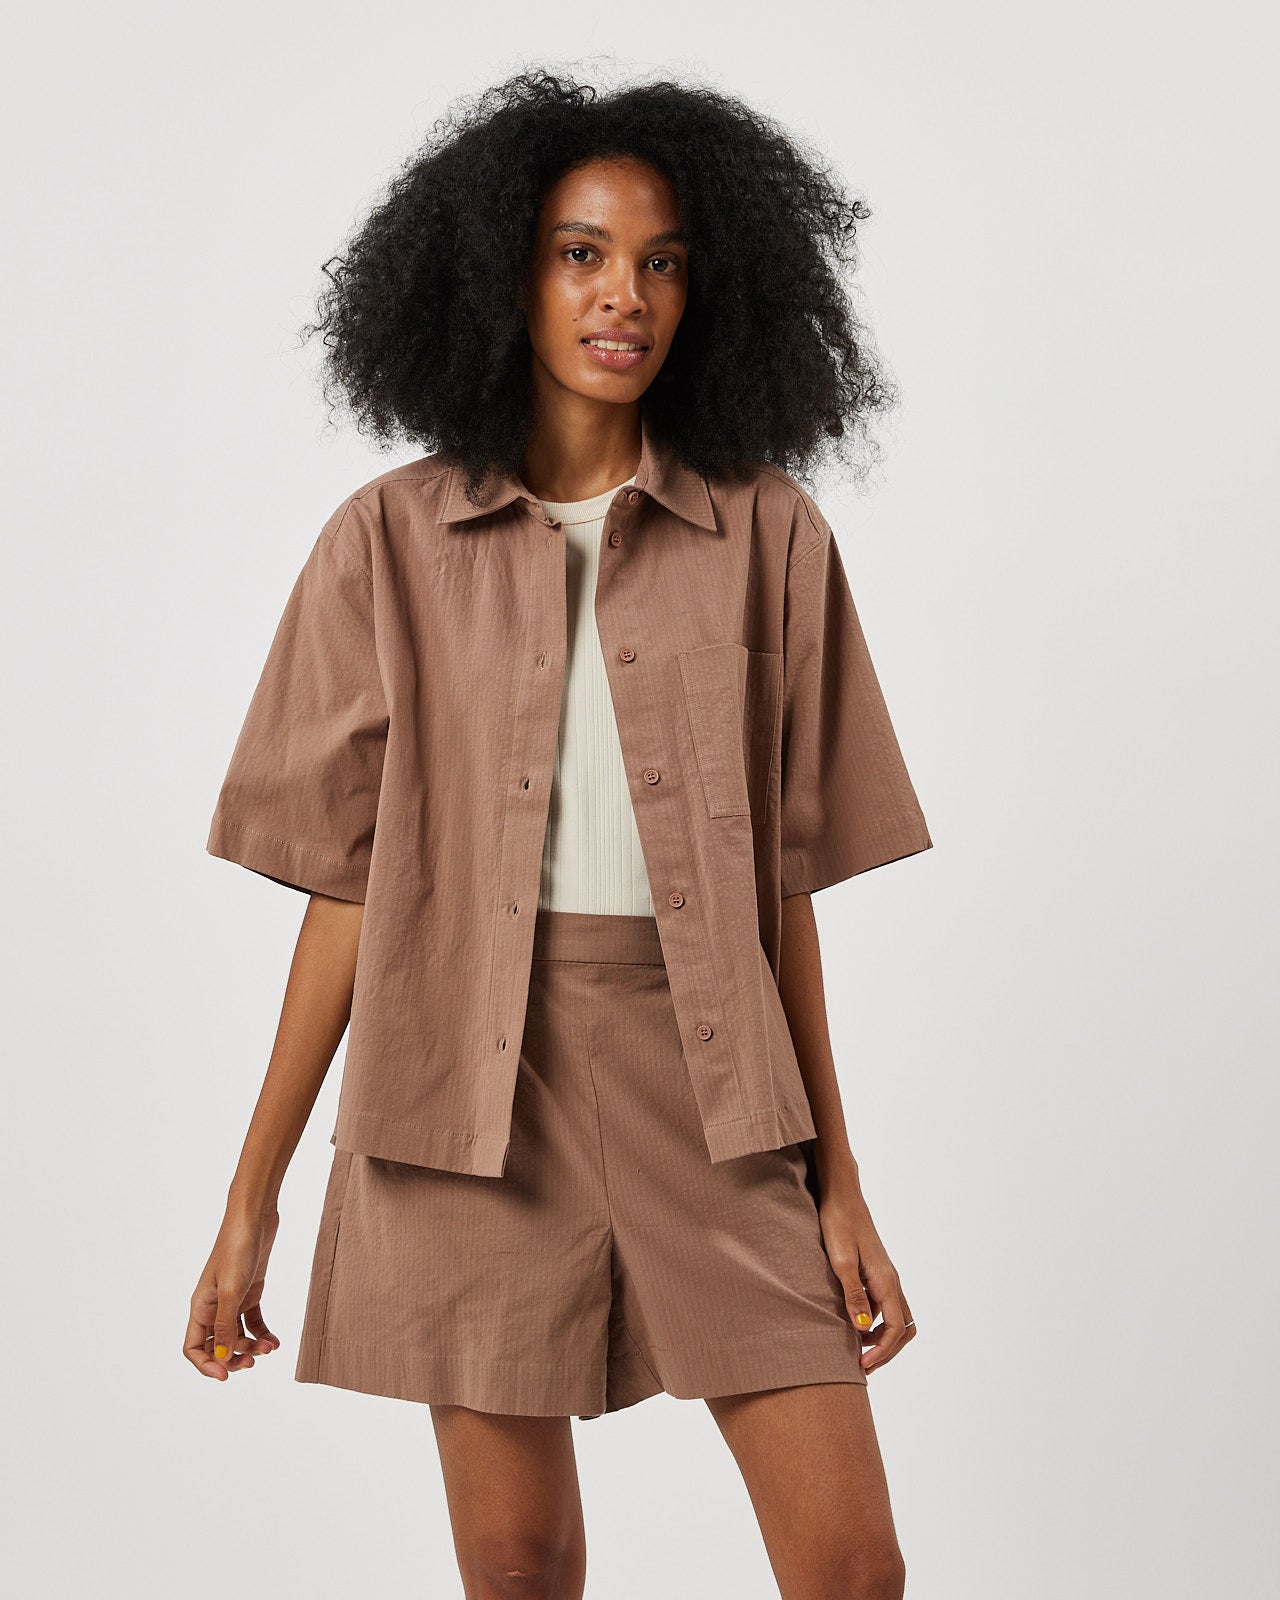 the Minimum Women's Luinna Shirt in Brownie on a model standing looking into the camera